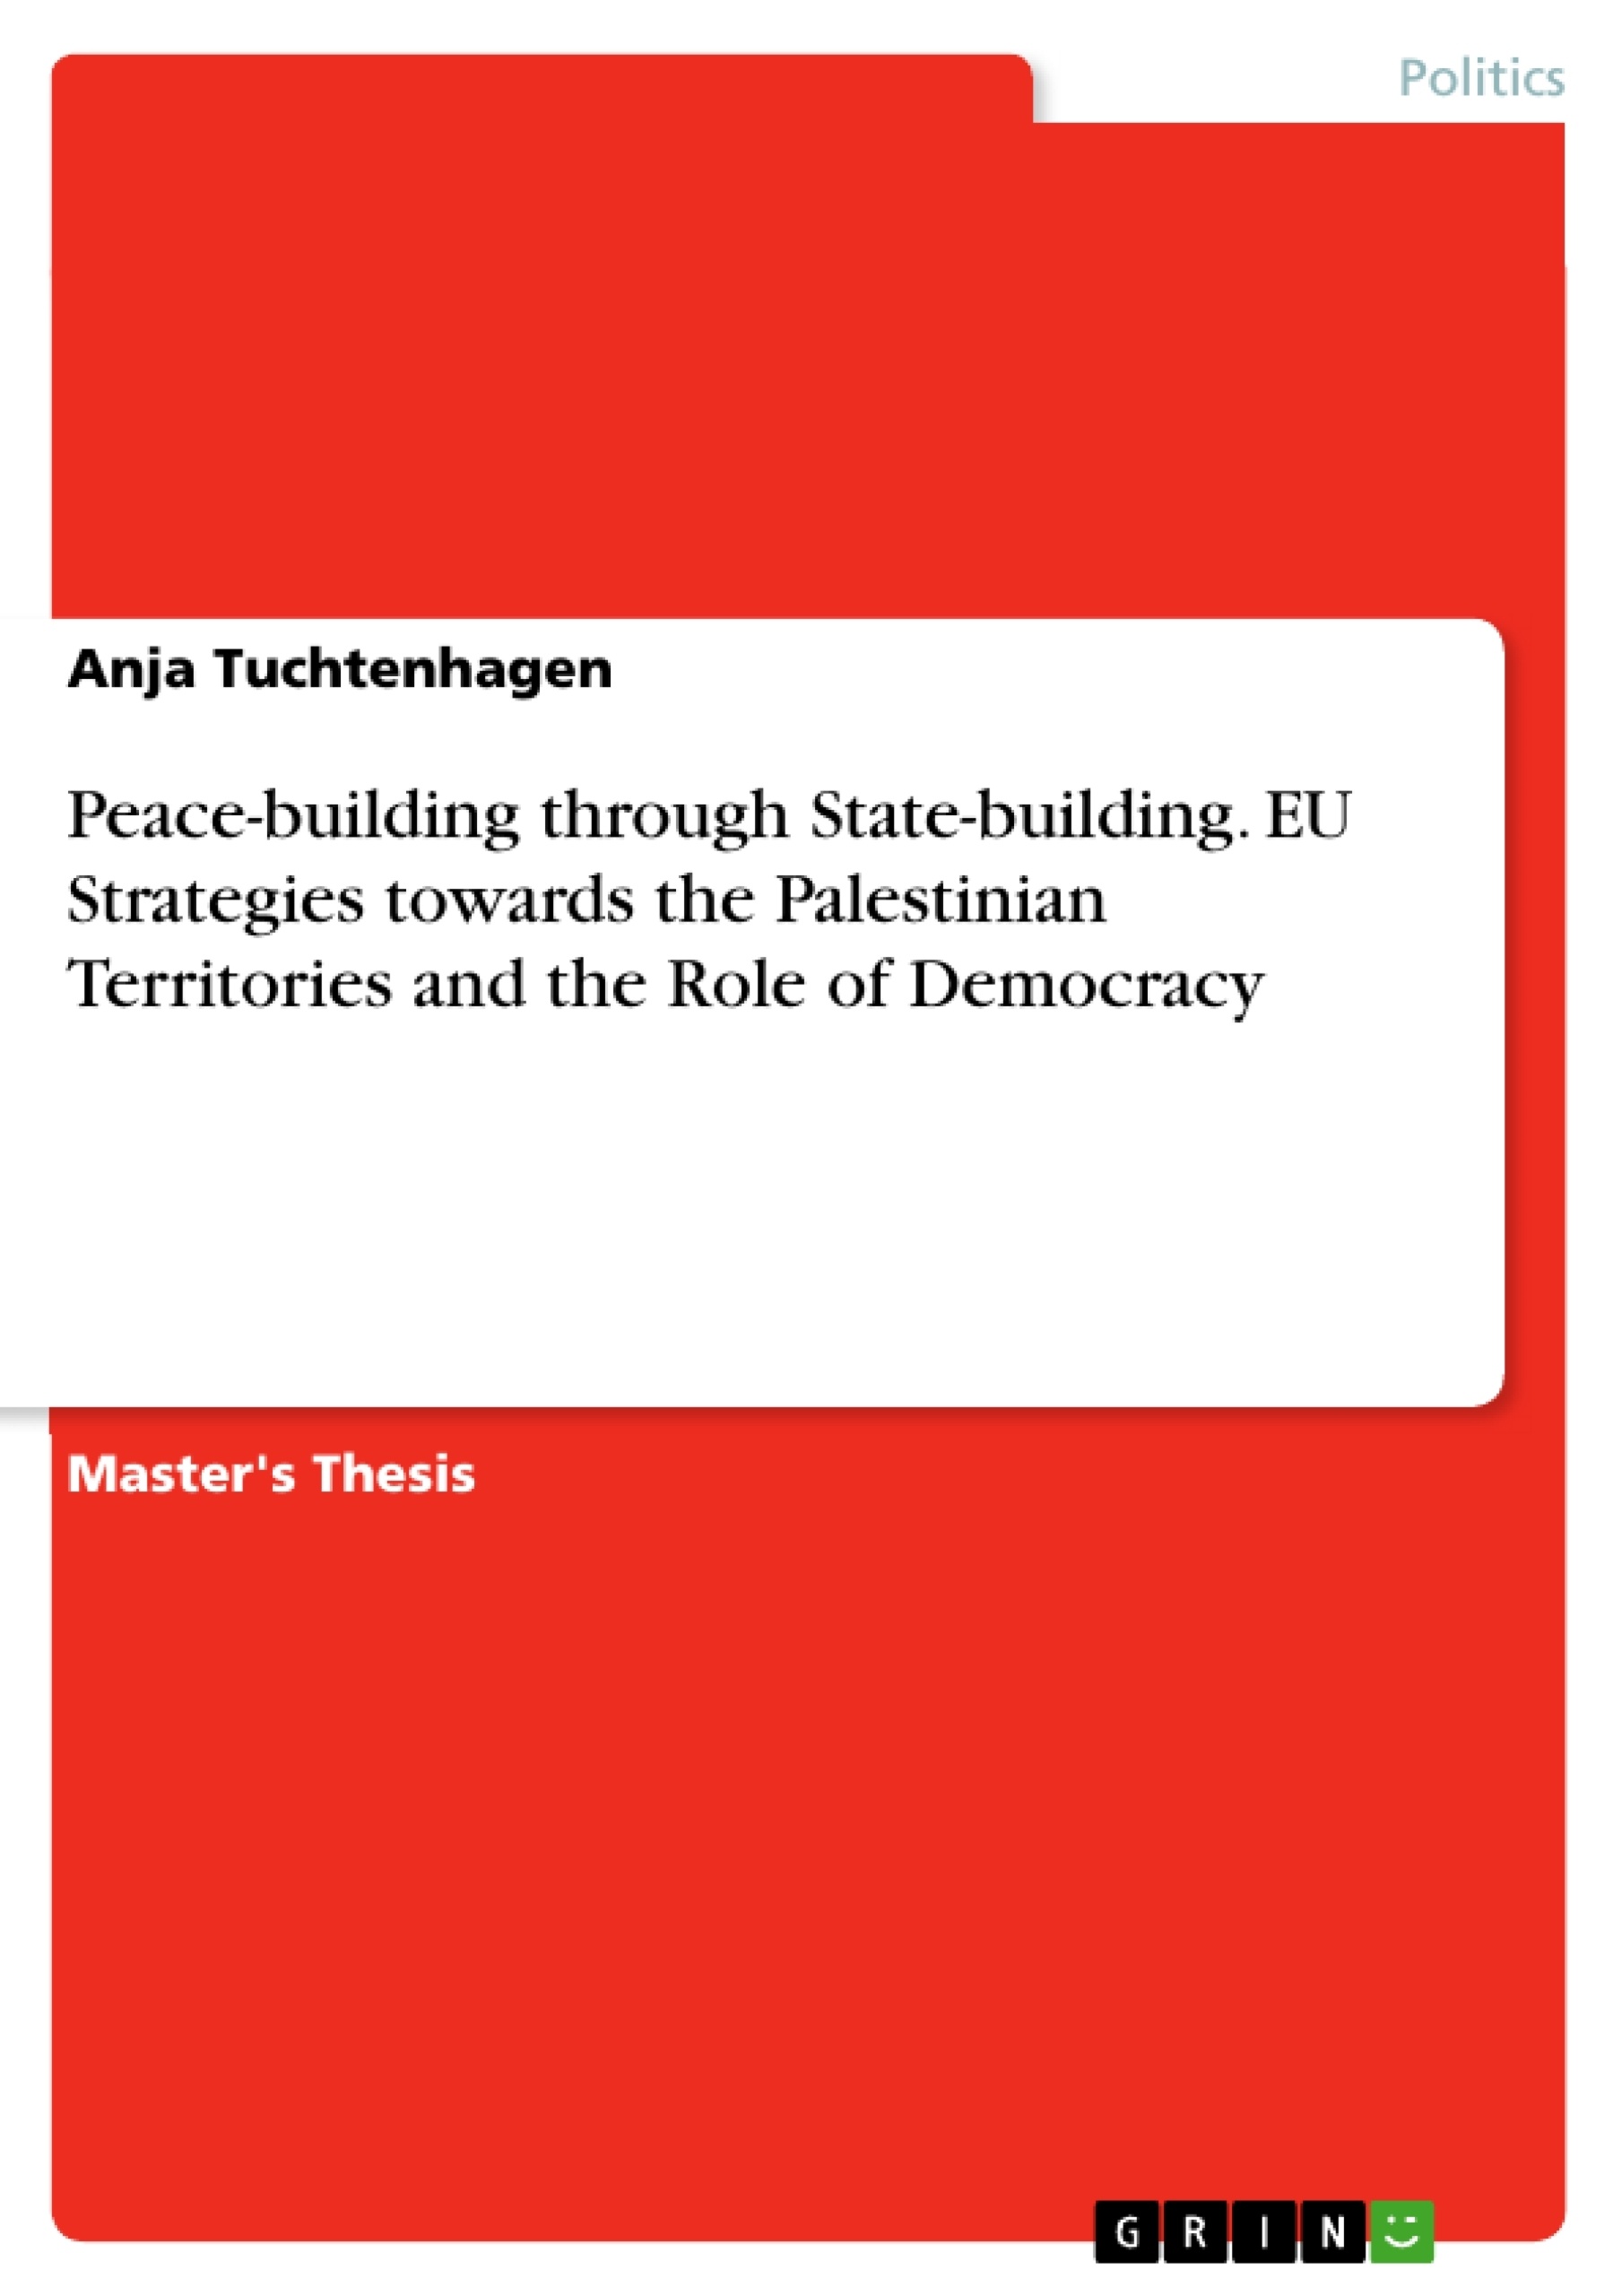 Title: Peace-building through State-building. EU Strategies towards the Palestinian Territories and the Role of Democracy